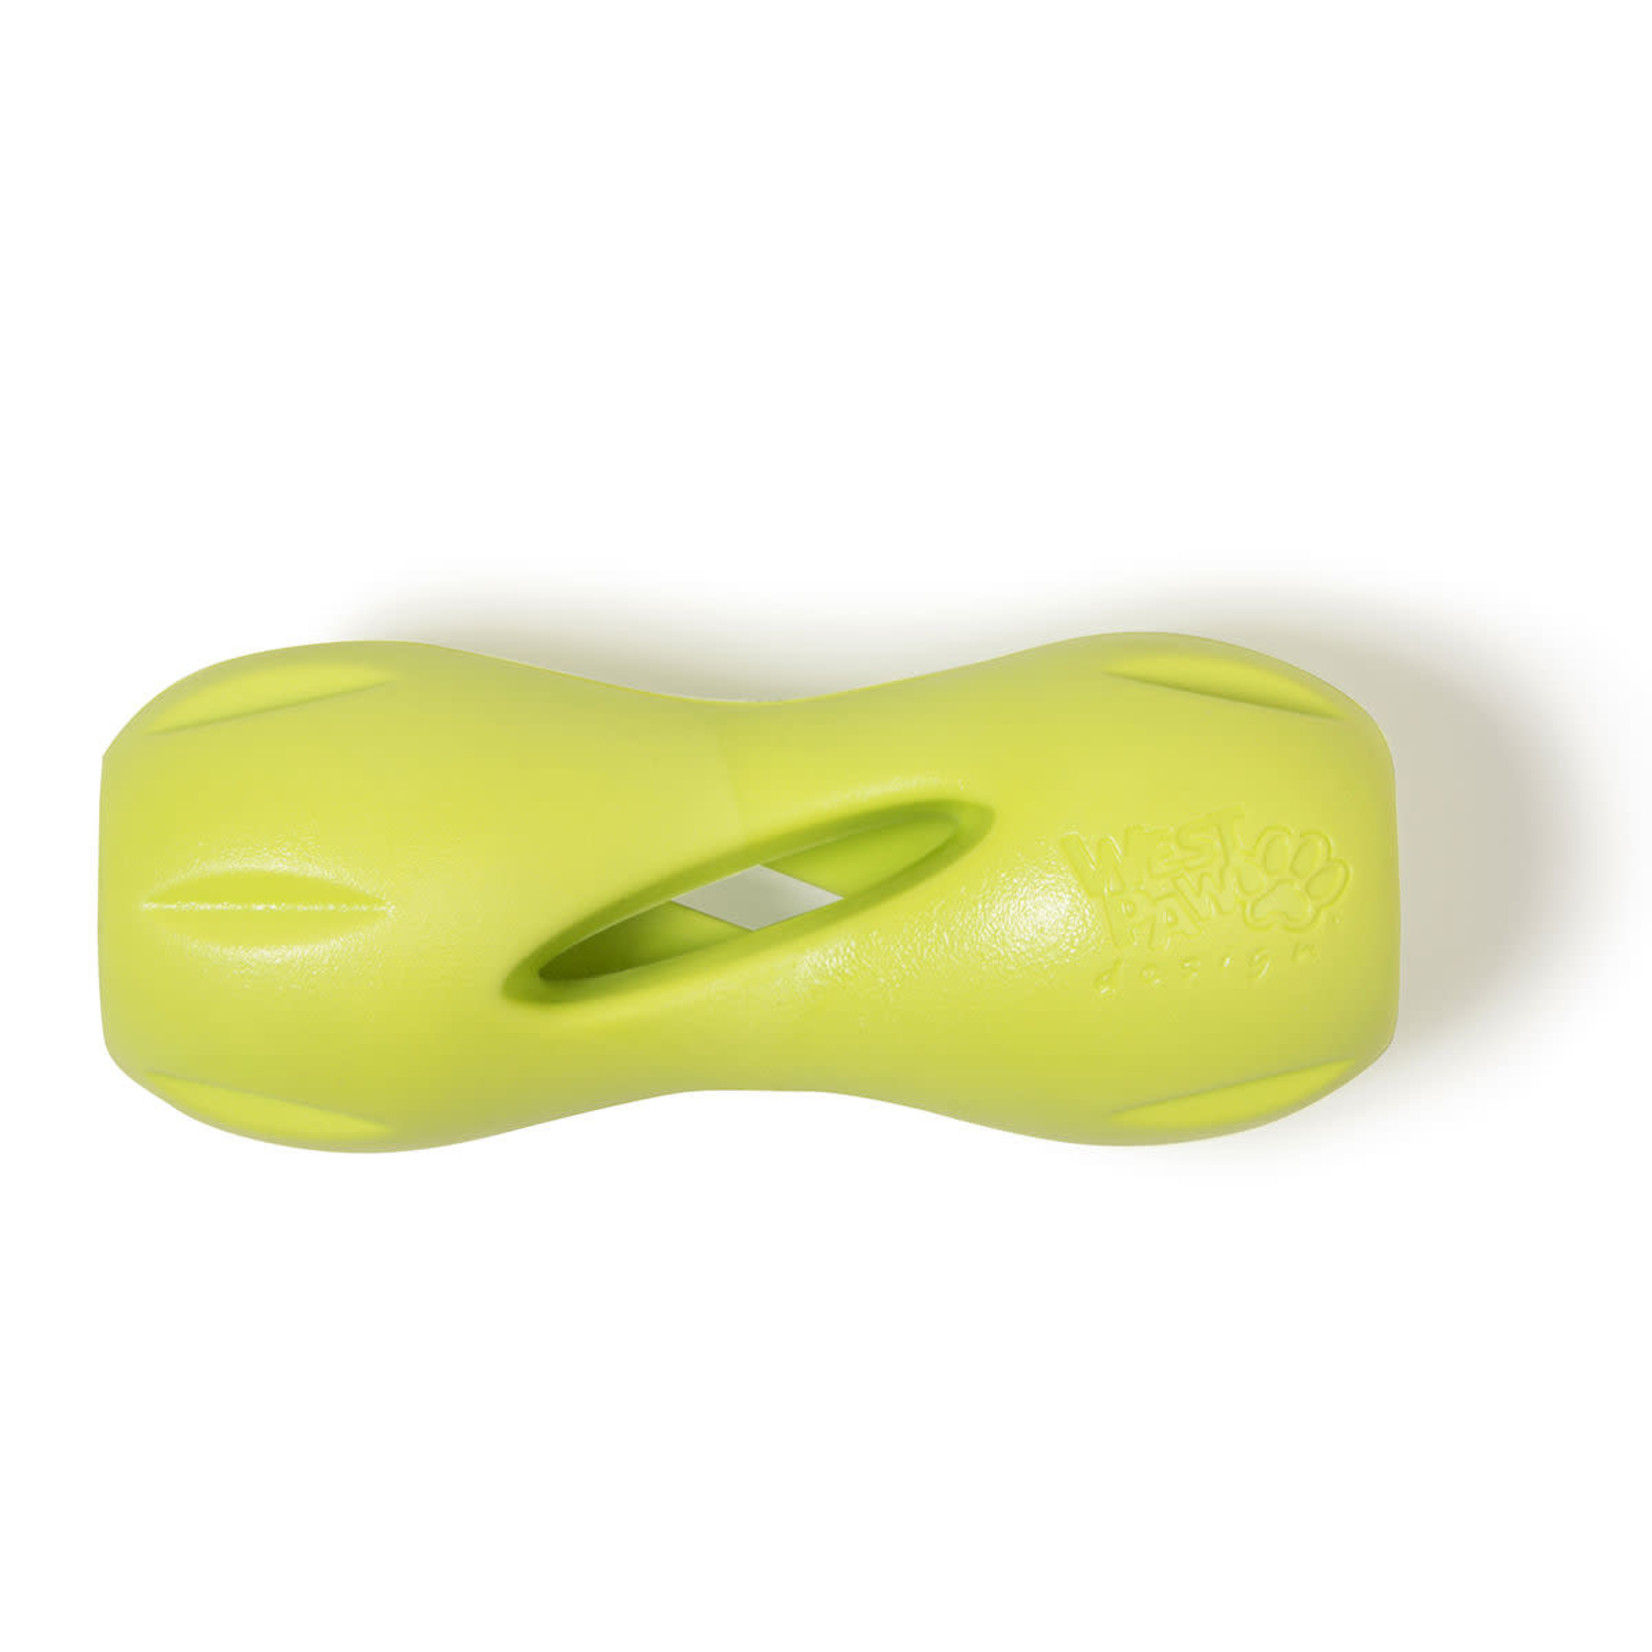 Qwizl Small 5.5" - green dog toy